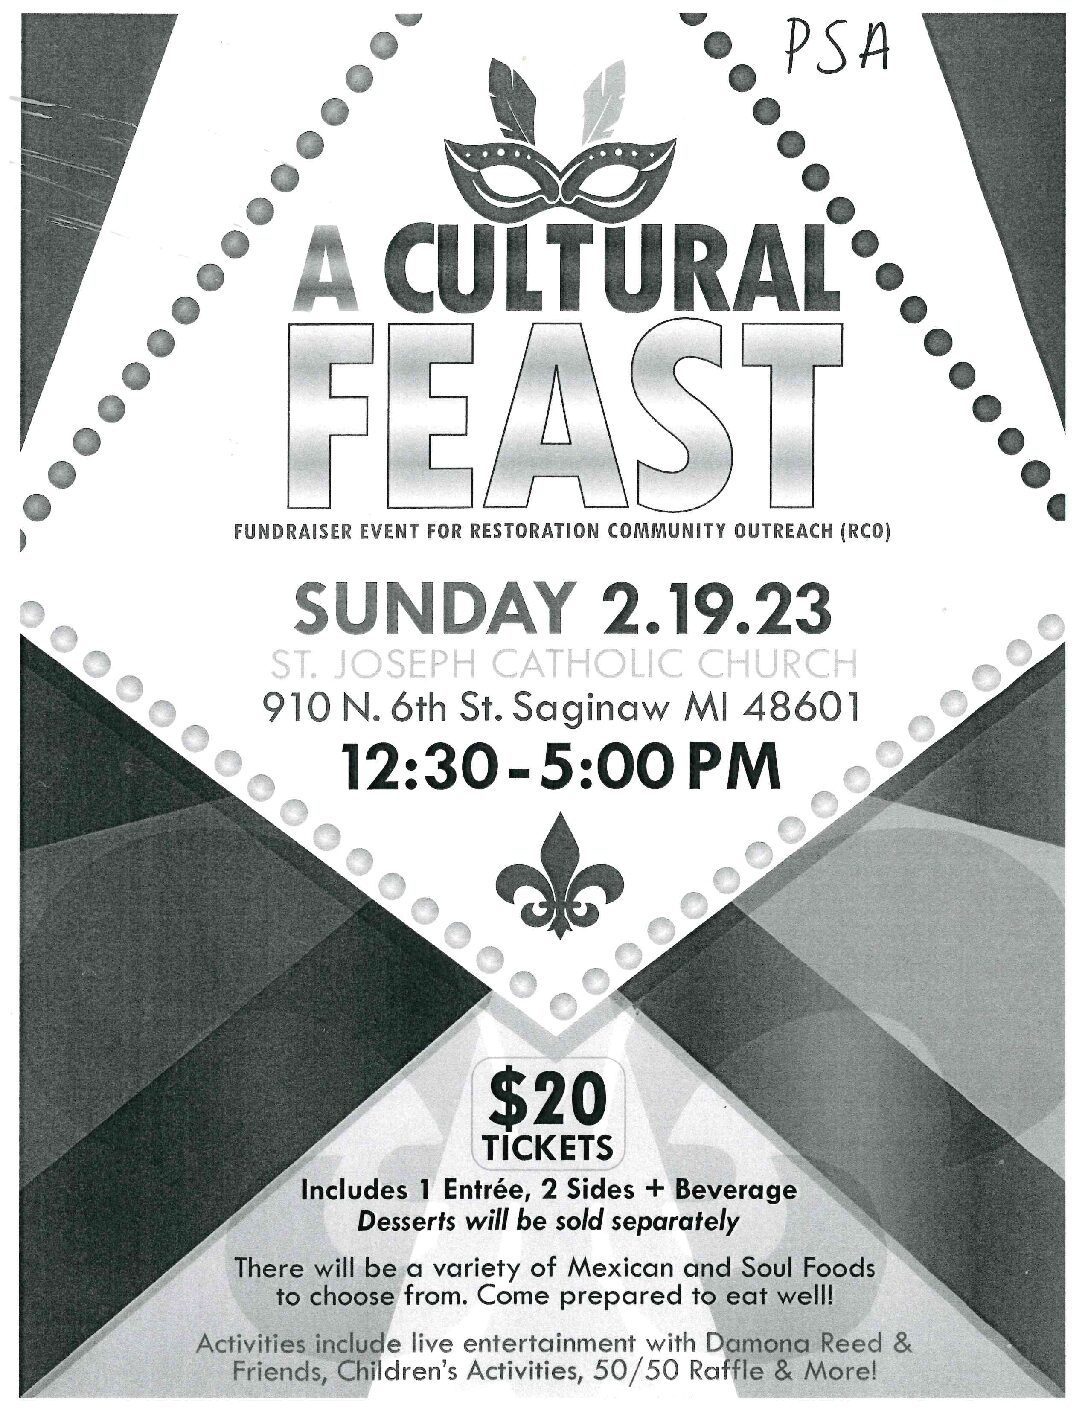 <h1 class="tribe-events-single-event-title">A Cultural Feast</h1>